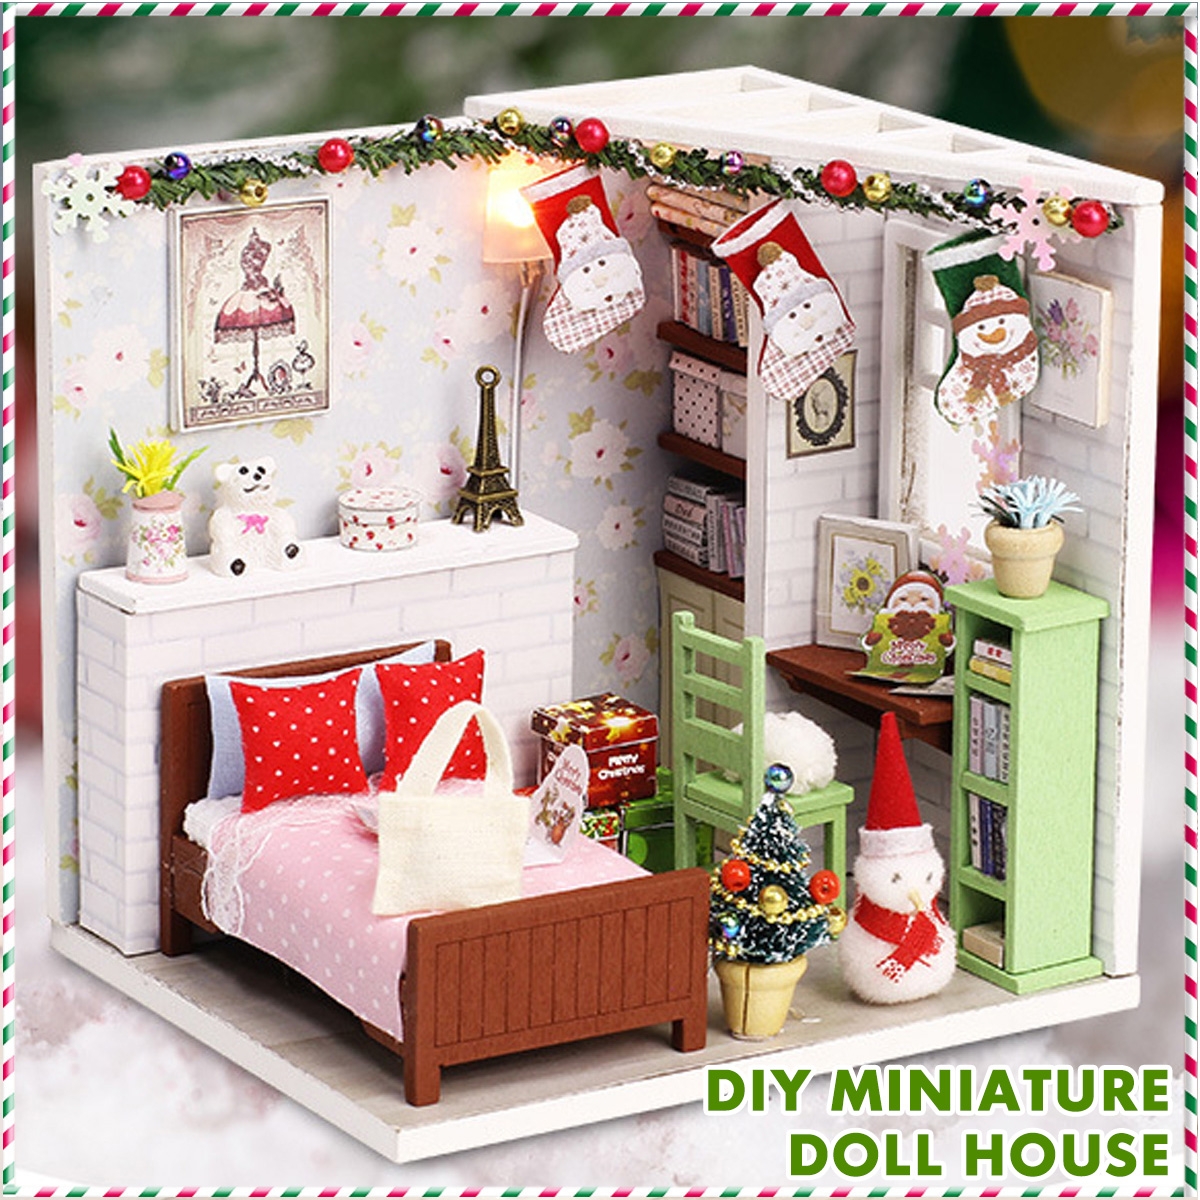 Wooden Bedroom DIY Handmade Assemble Doll House Miniature Furniture Kit Education Toy with LED Light for Collection Birthday Gift